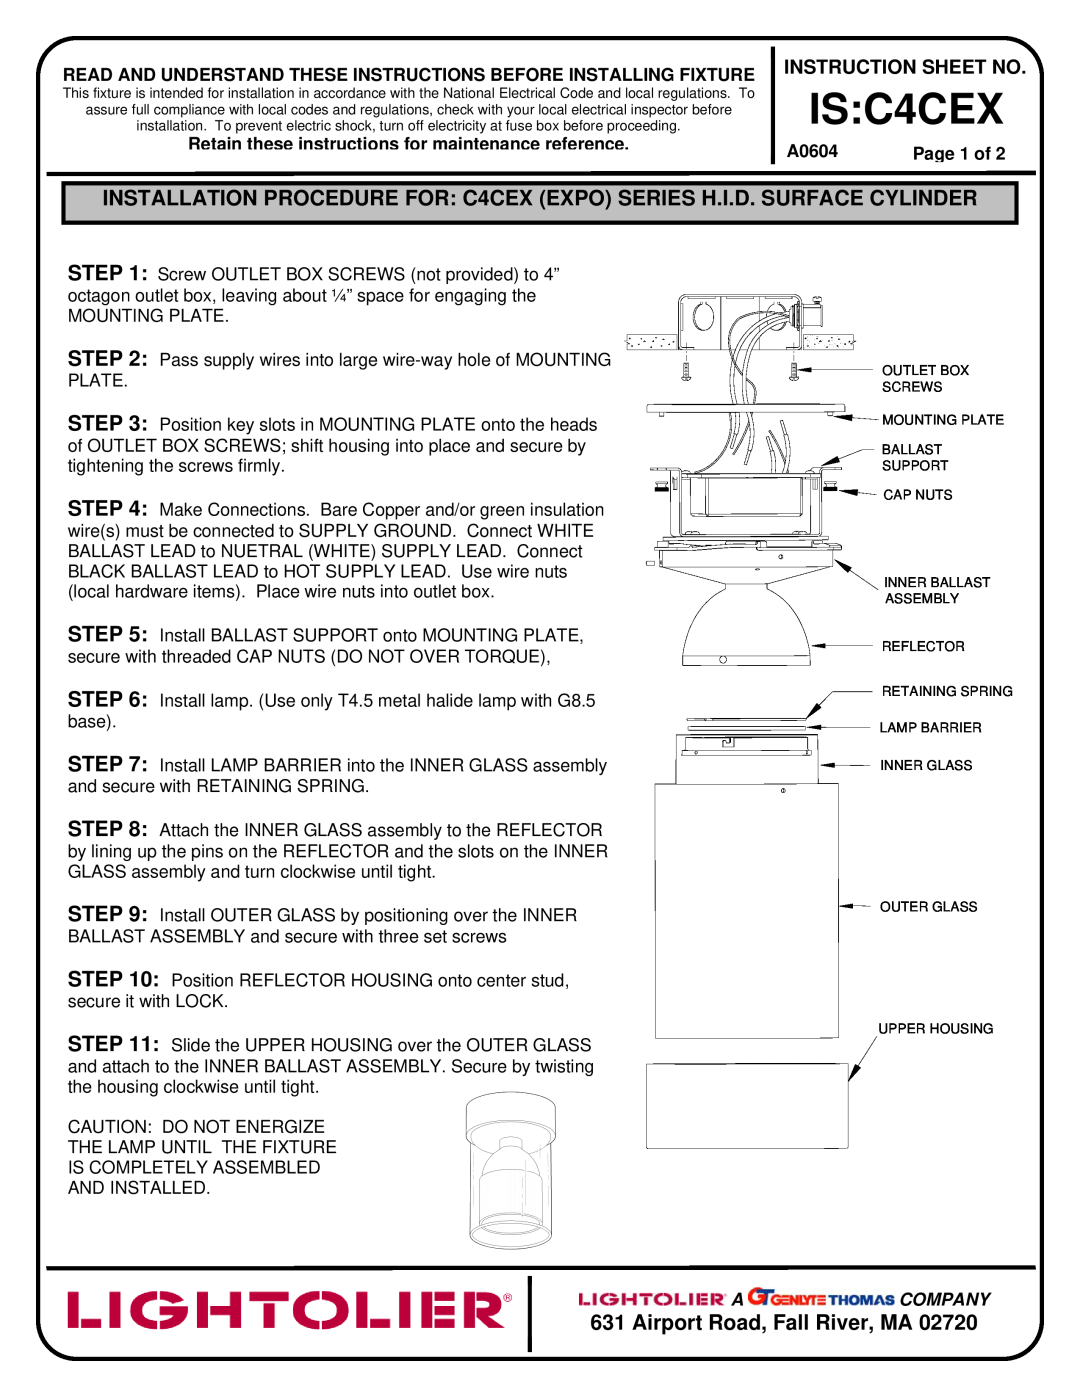 Lightolier instruction sheet IS C4CEX, Airport Road, Fall River, MA, Instruction Sheet No, A0604, Page 1 of, A Company 